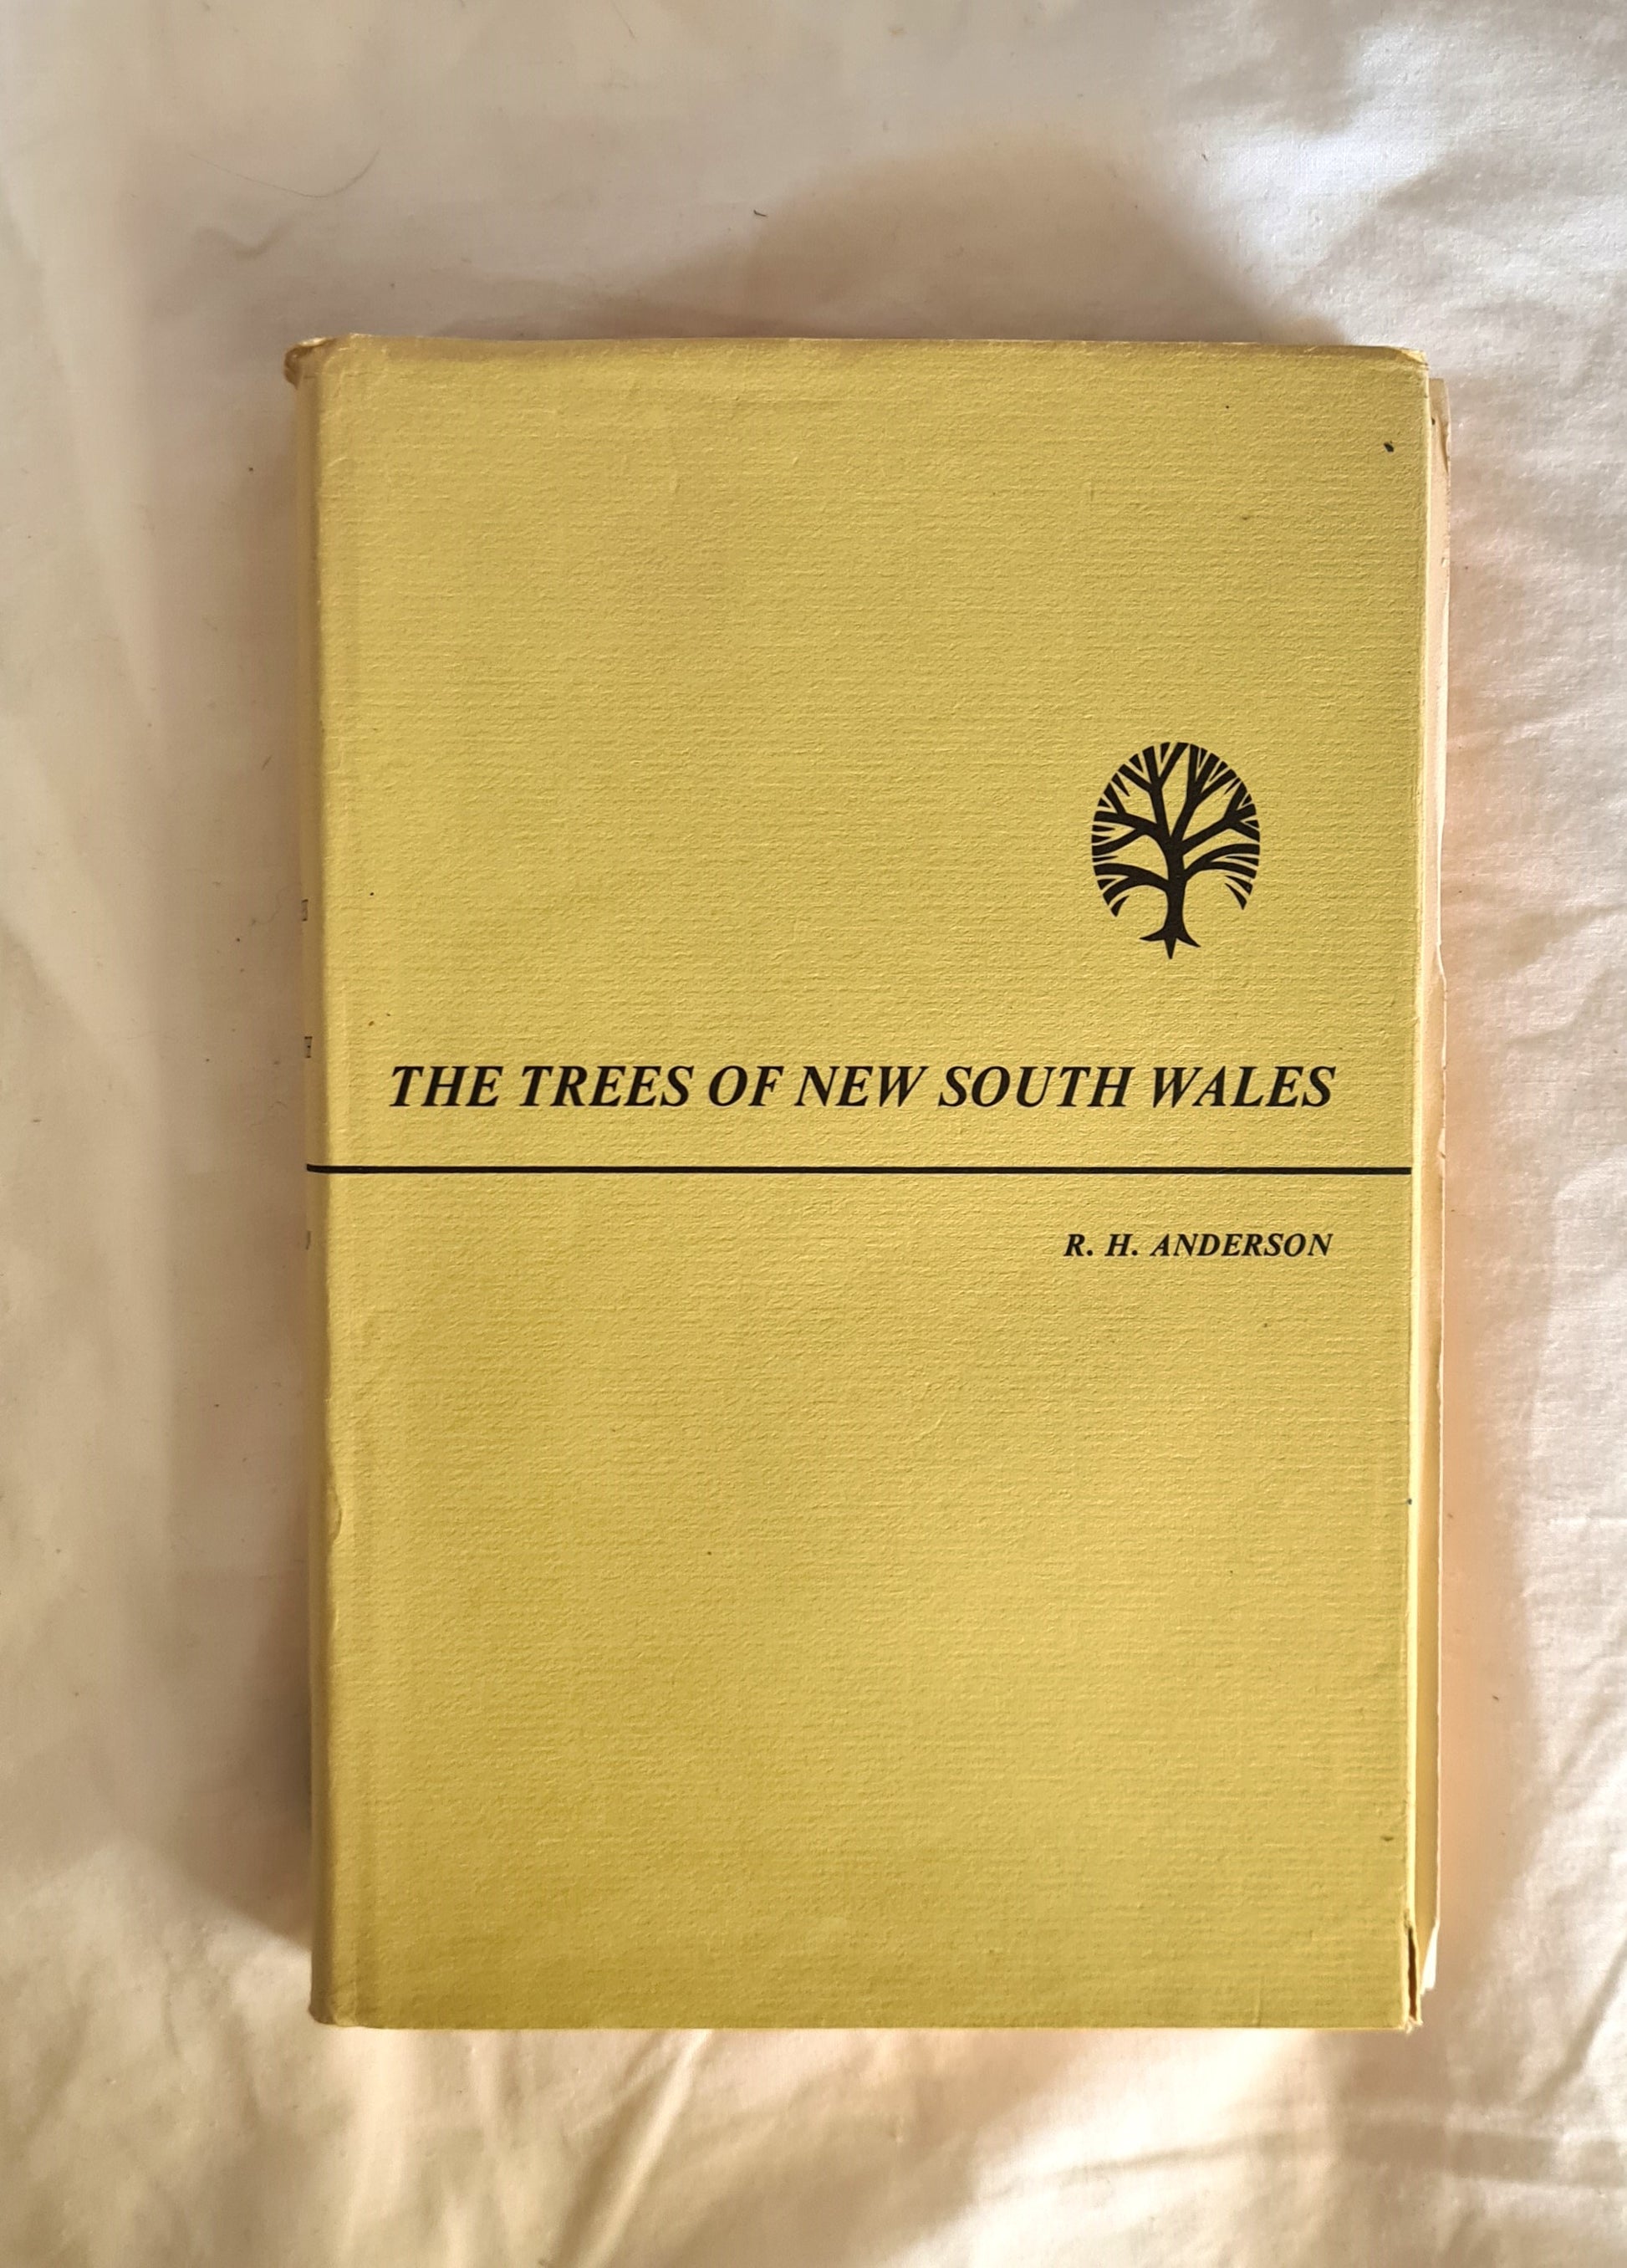 The Trees of New South Wales by R. H. Anderson